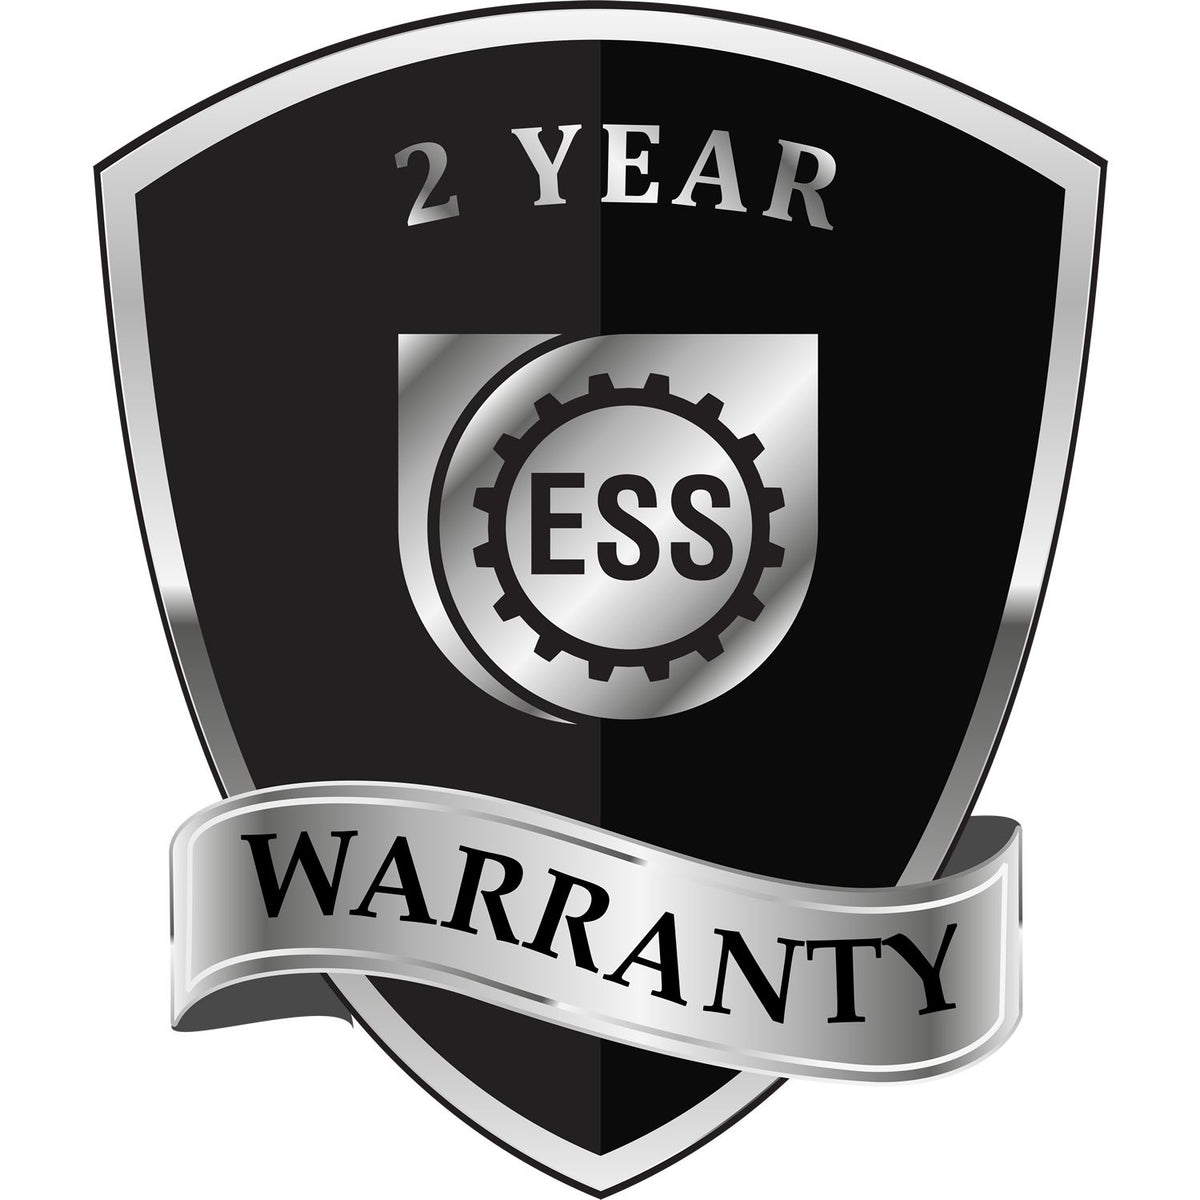 A badge or emblem showing a warranty icon for the Long Reach North Dakota PE Seal